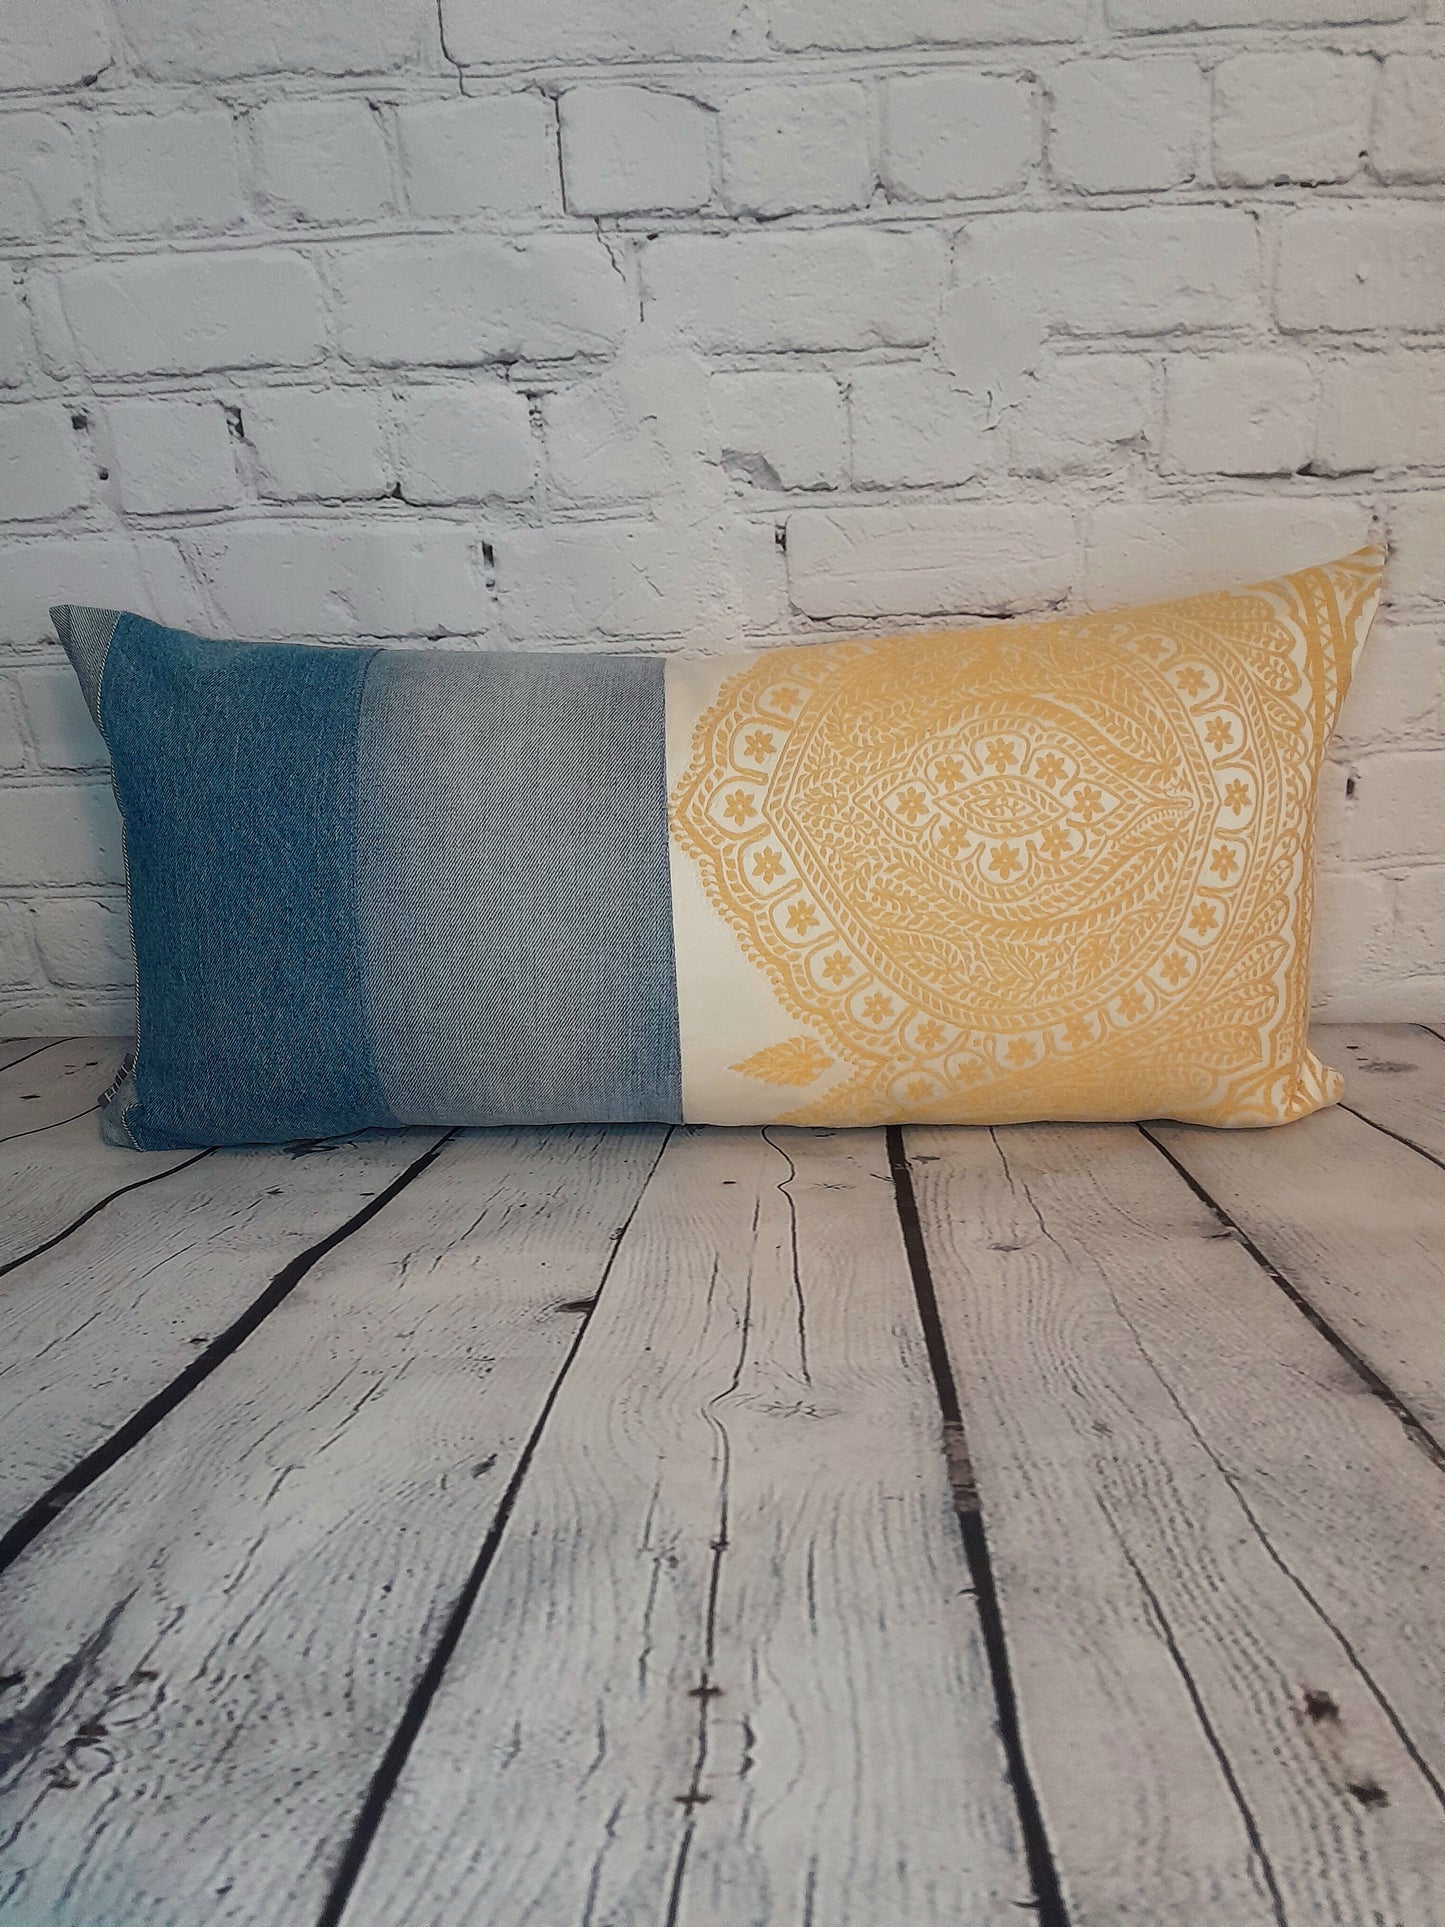 repurposed denim jeans, embroidered cushions in blue and yellow.